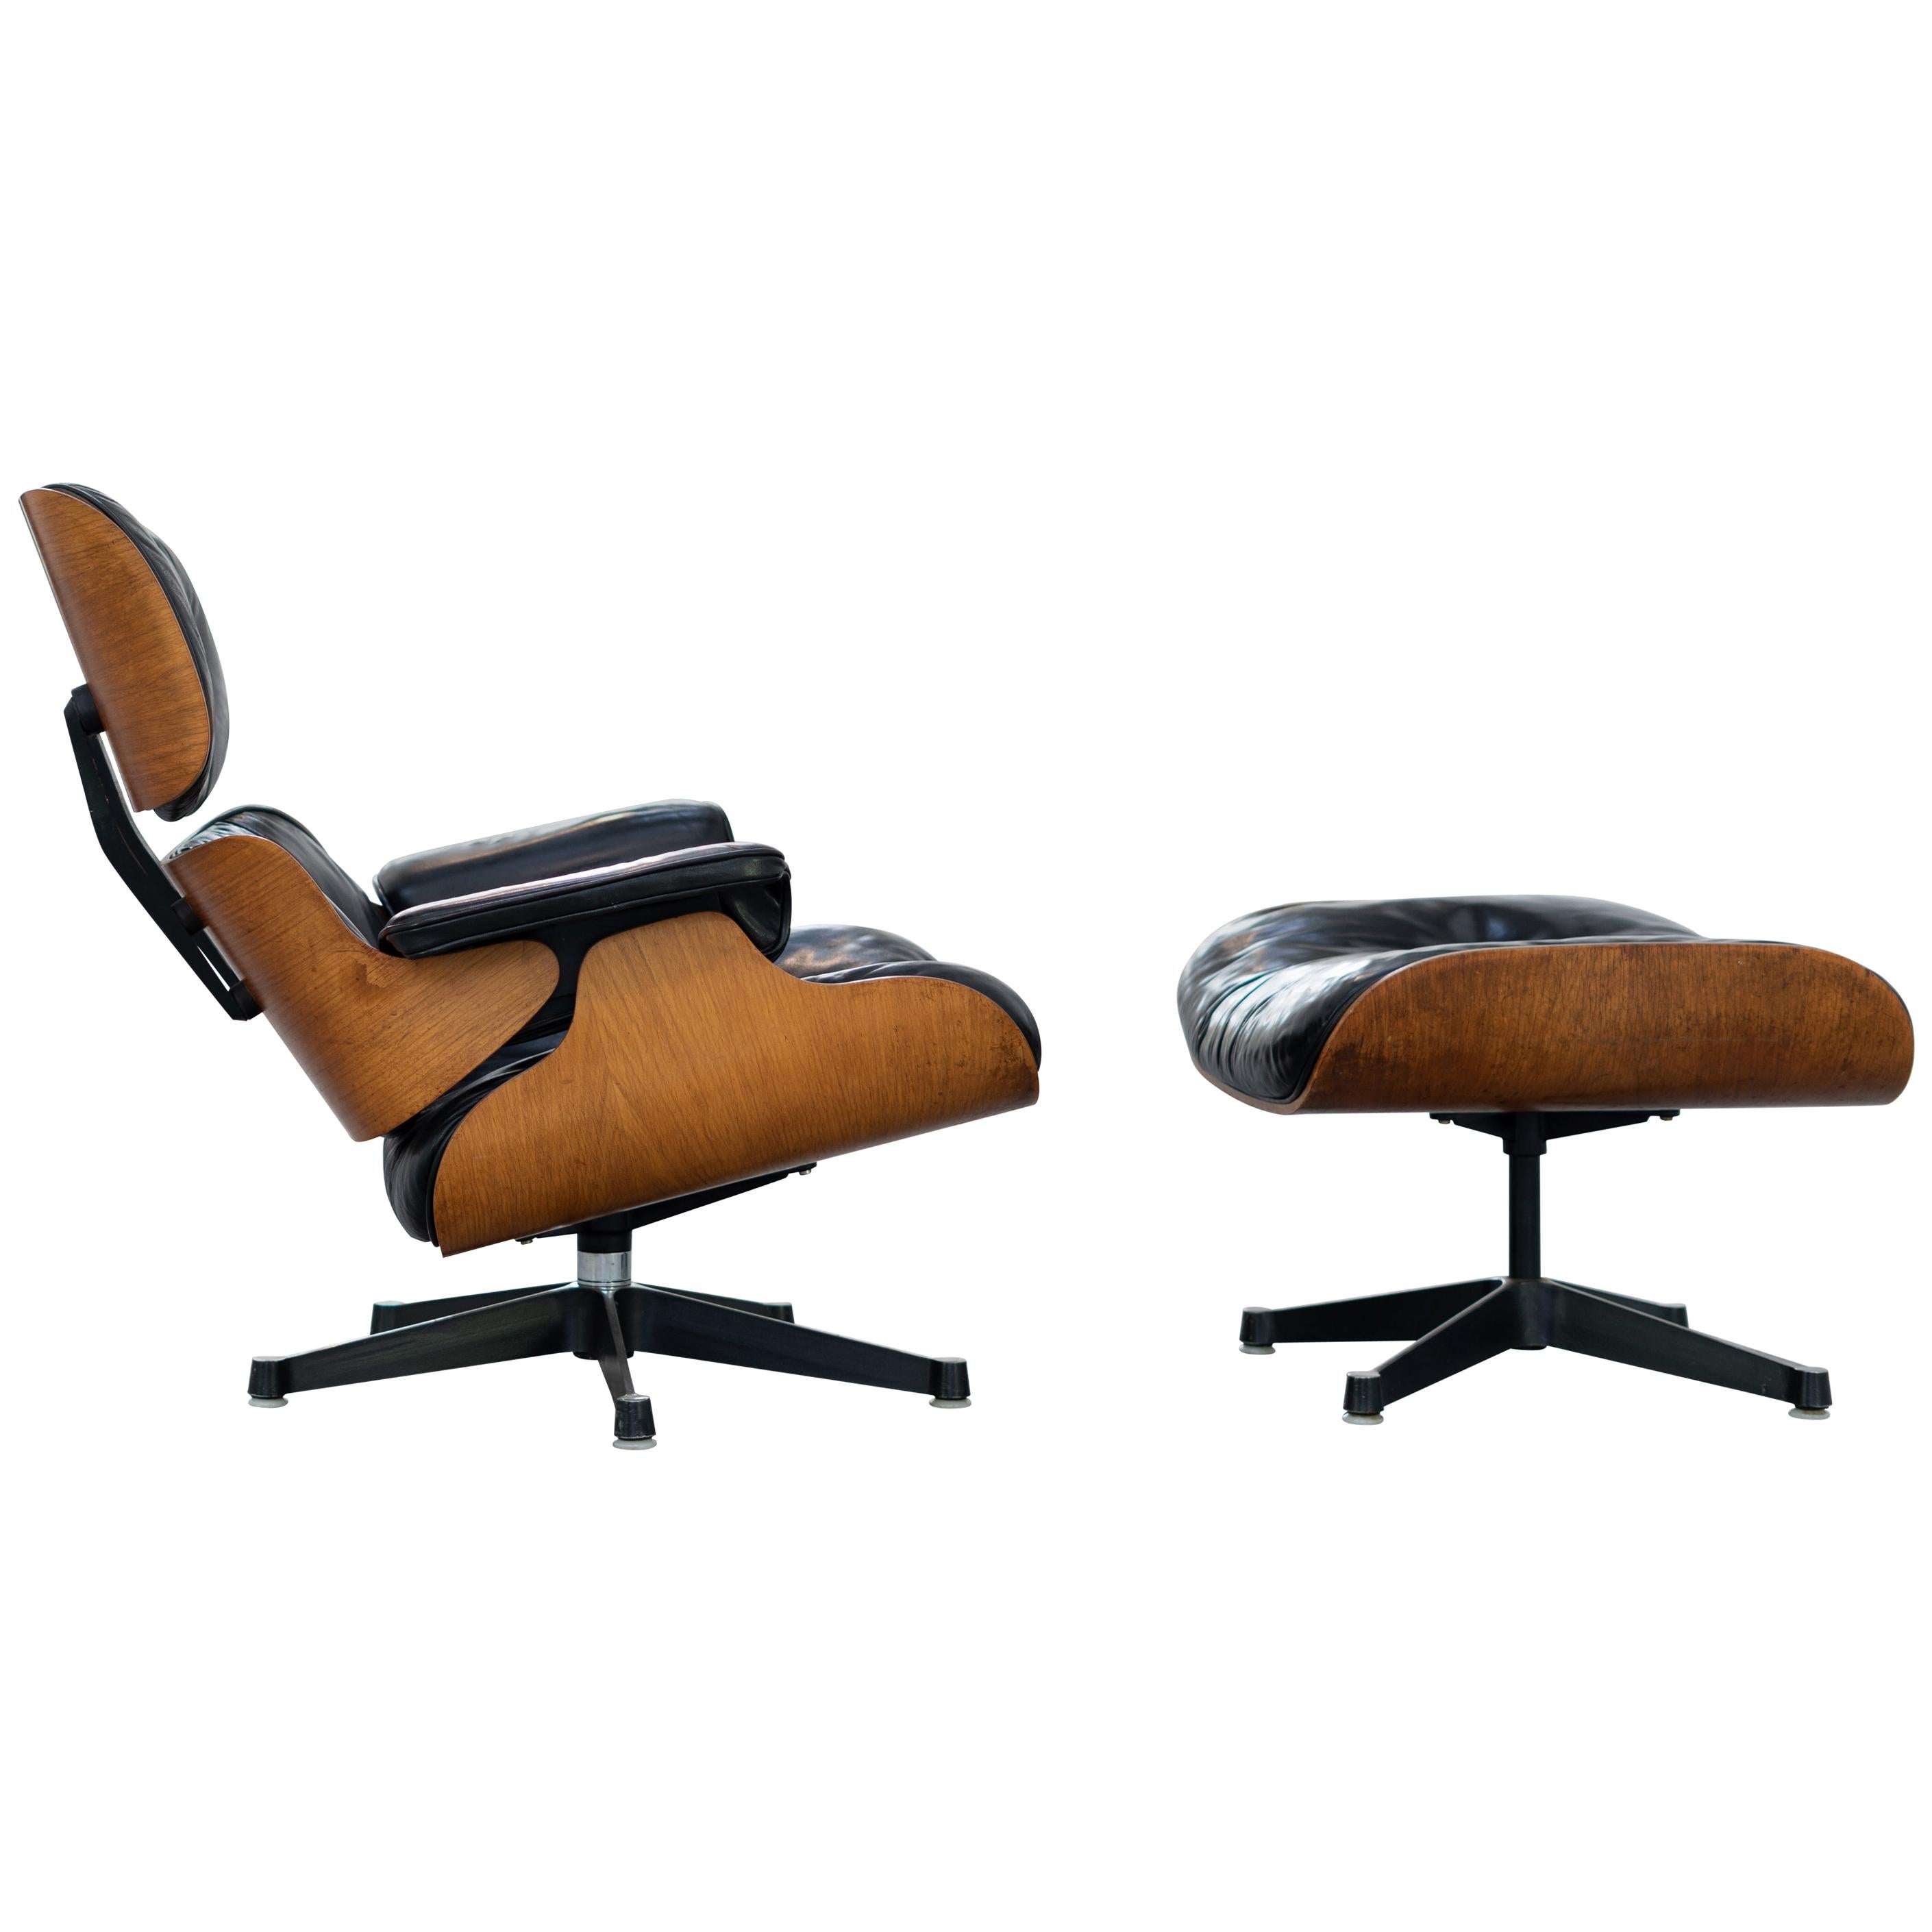 Very Early Charles & Ray Eames Lounge Chair and Ottoman from Contura, 1957-1965